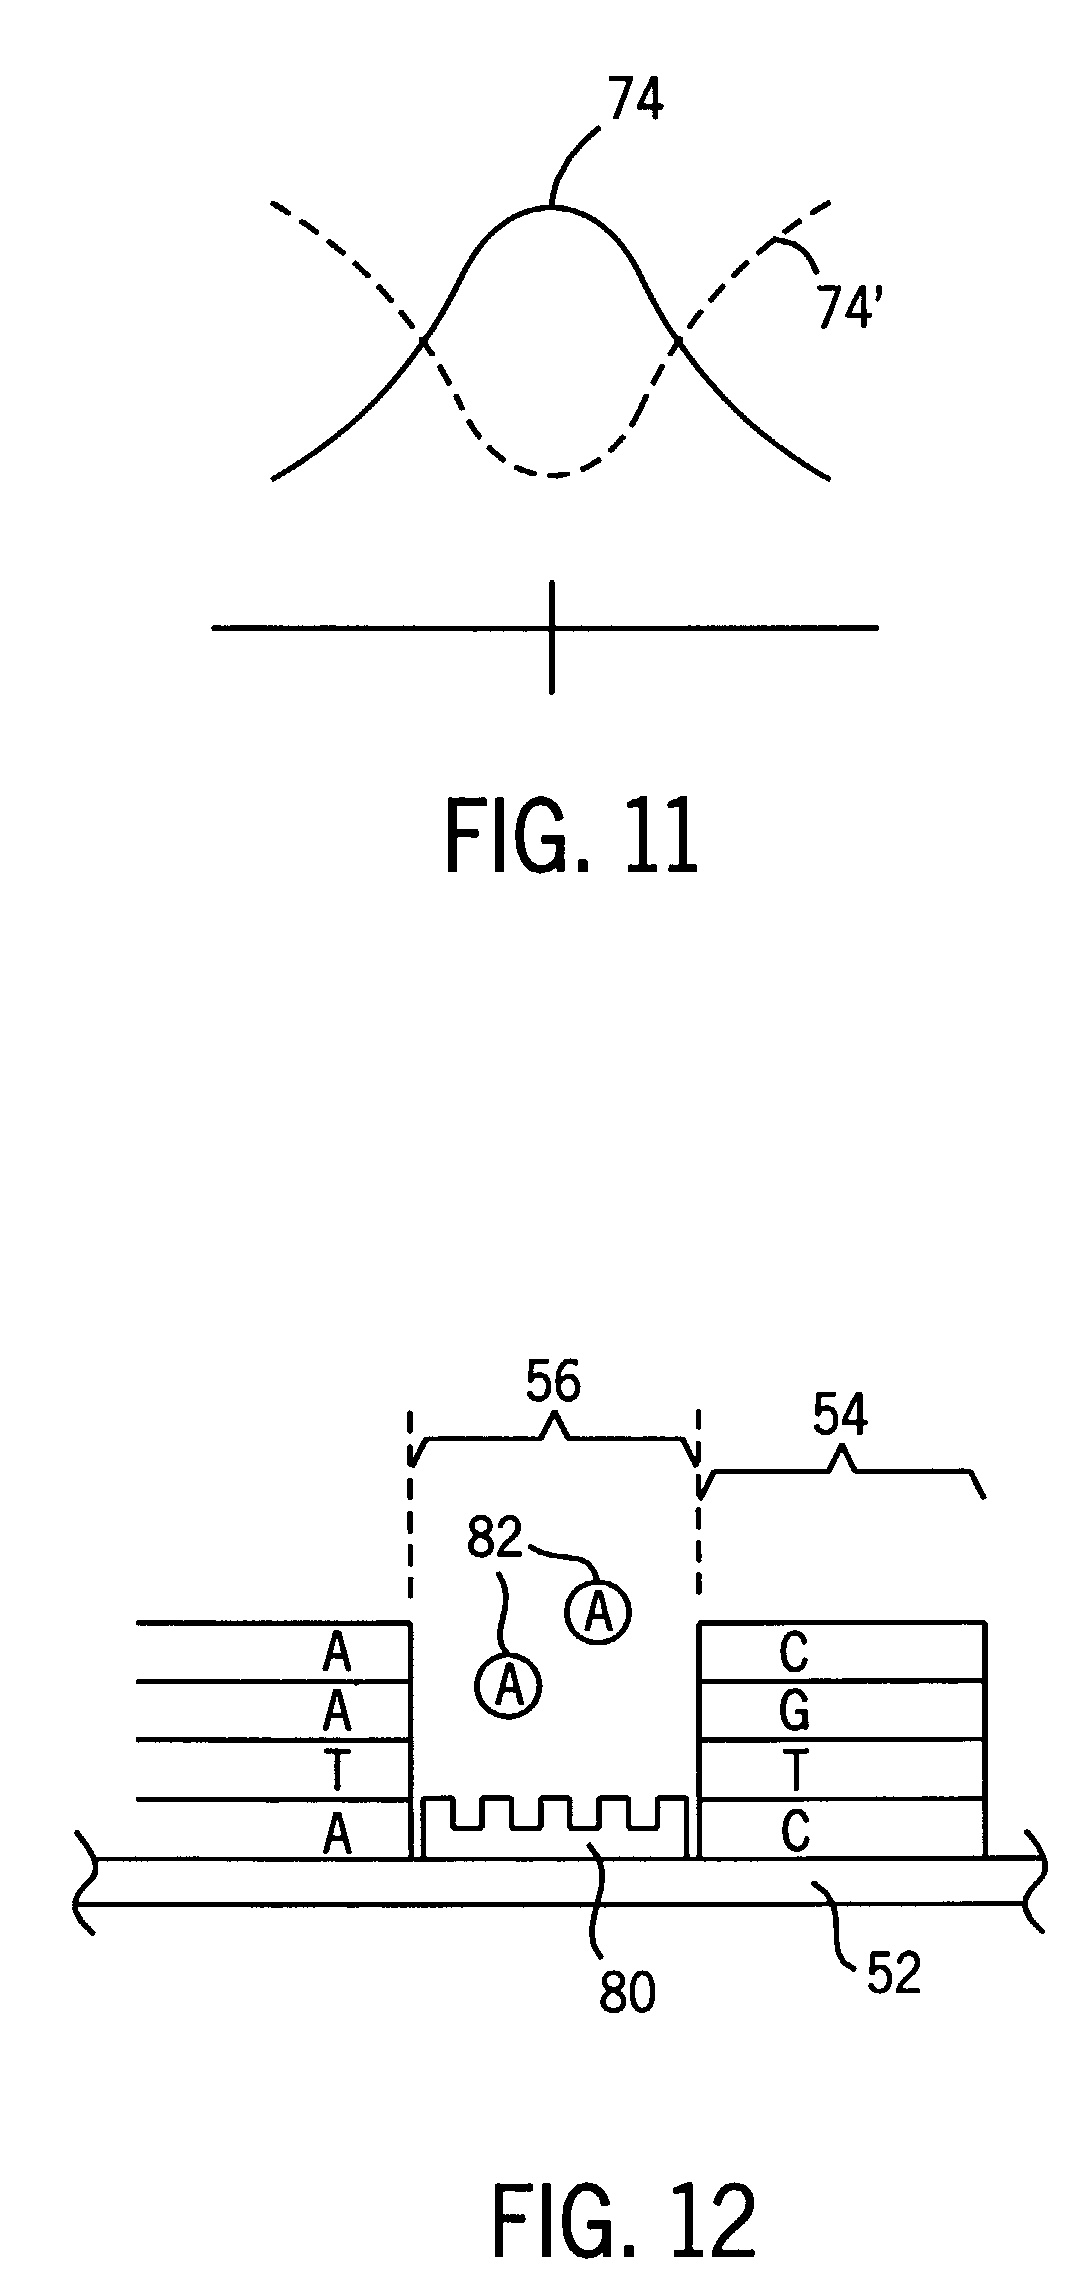 Prepatterned substrate for optical synthesis of DNA probes